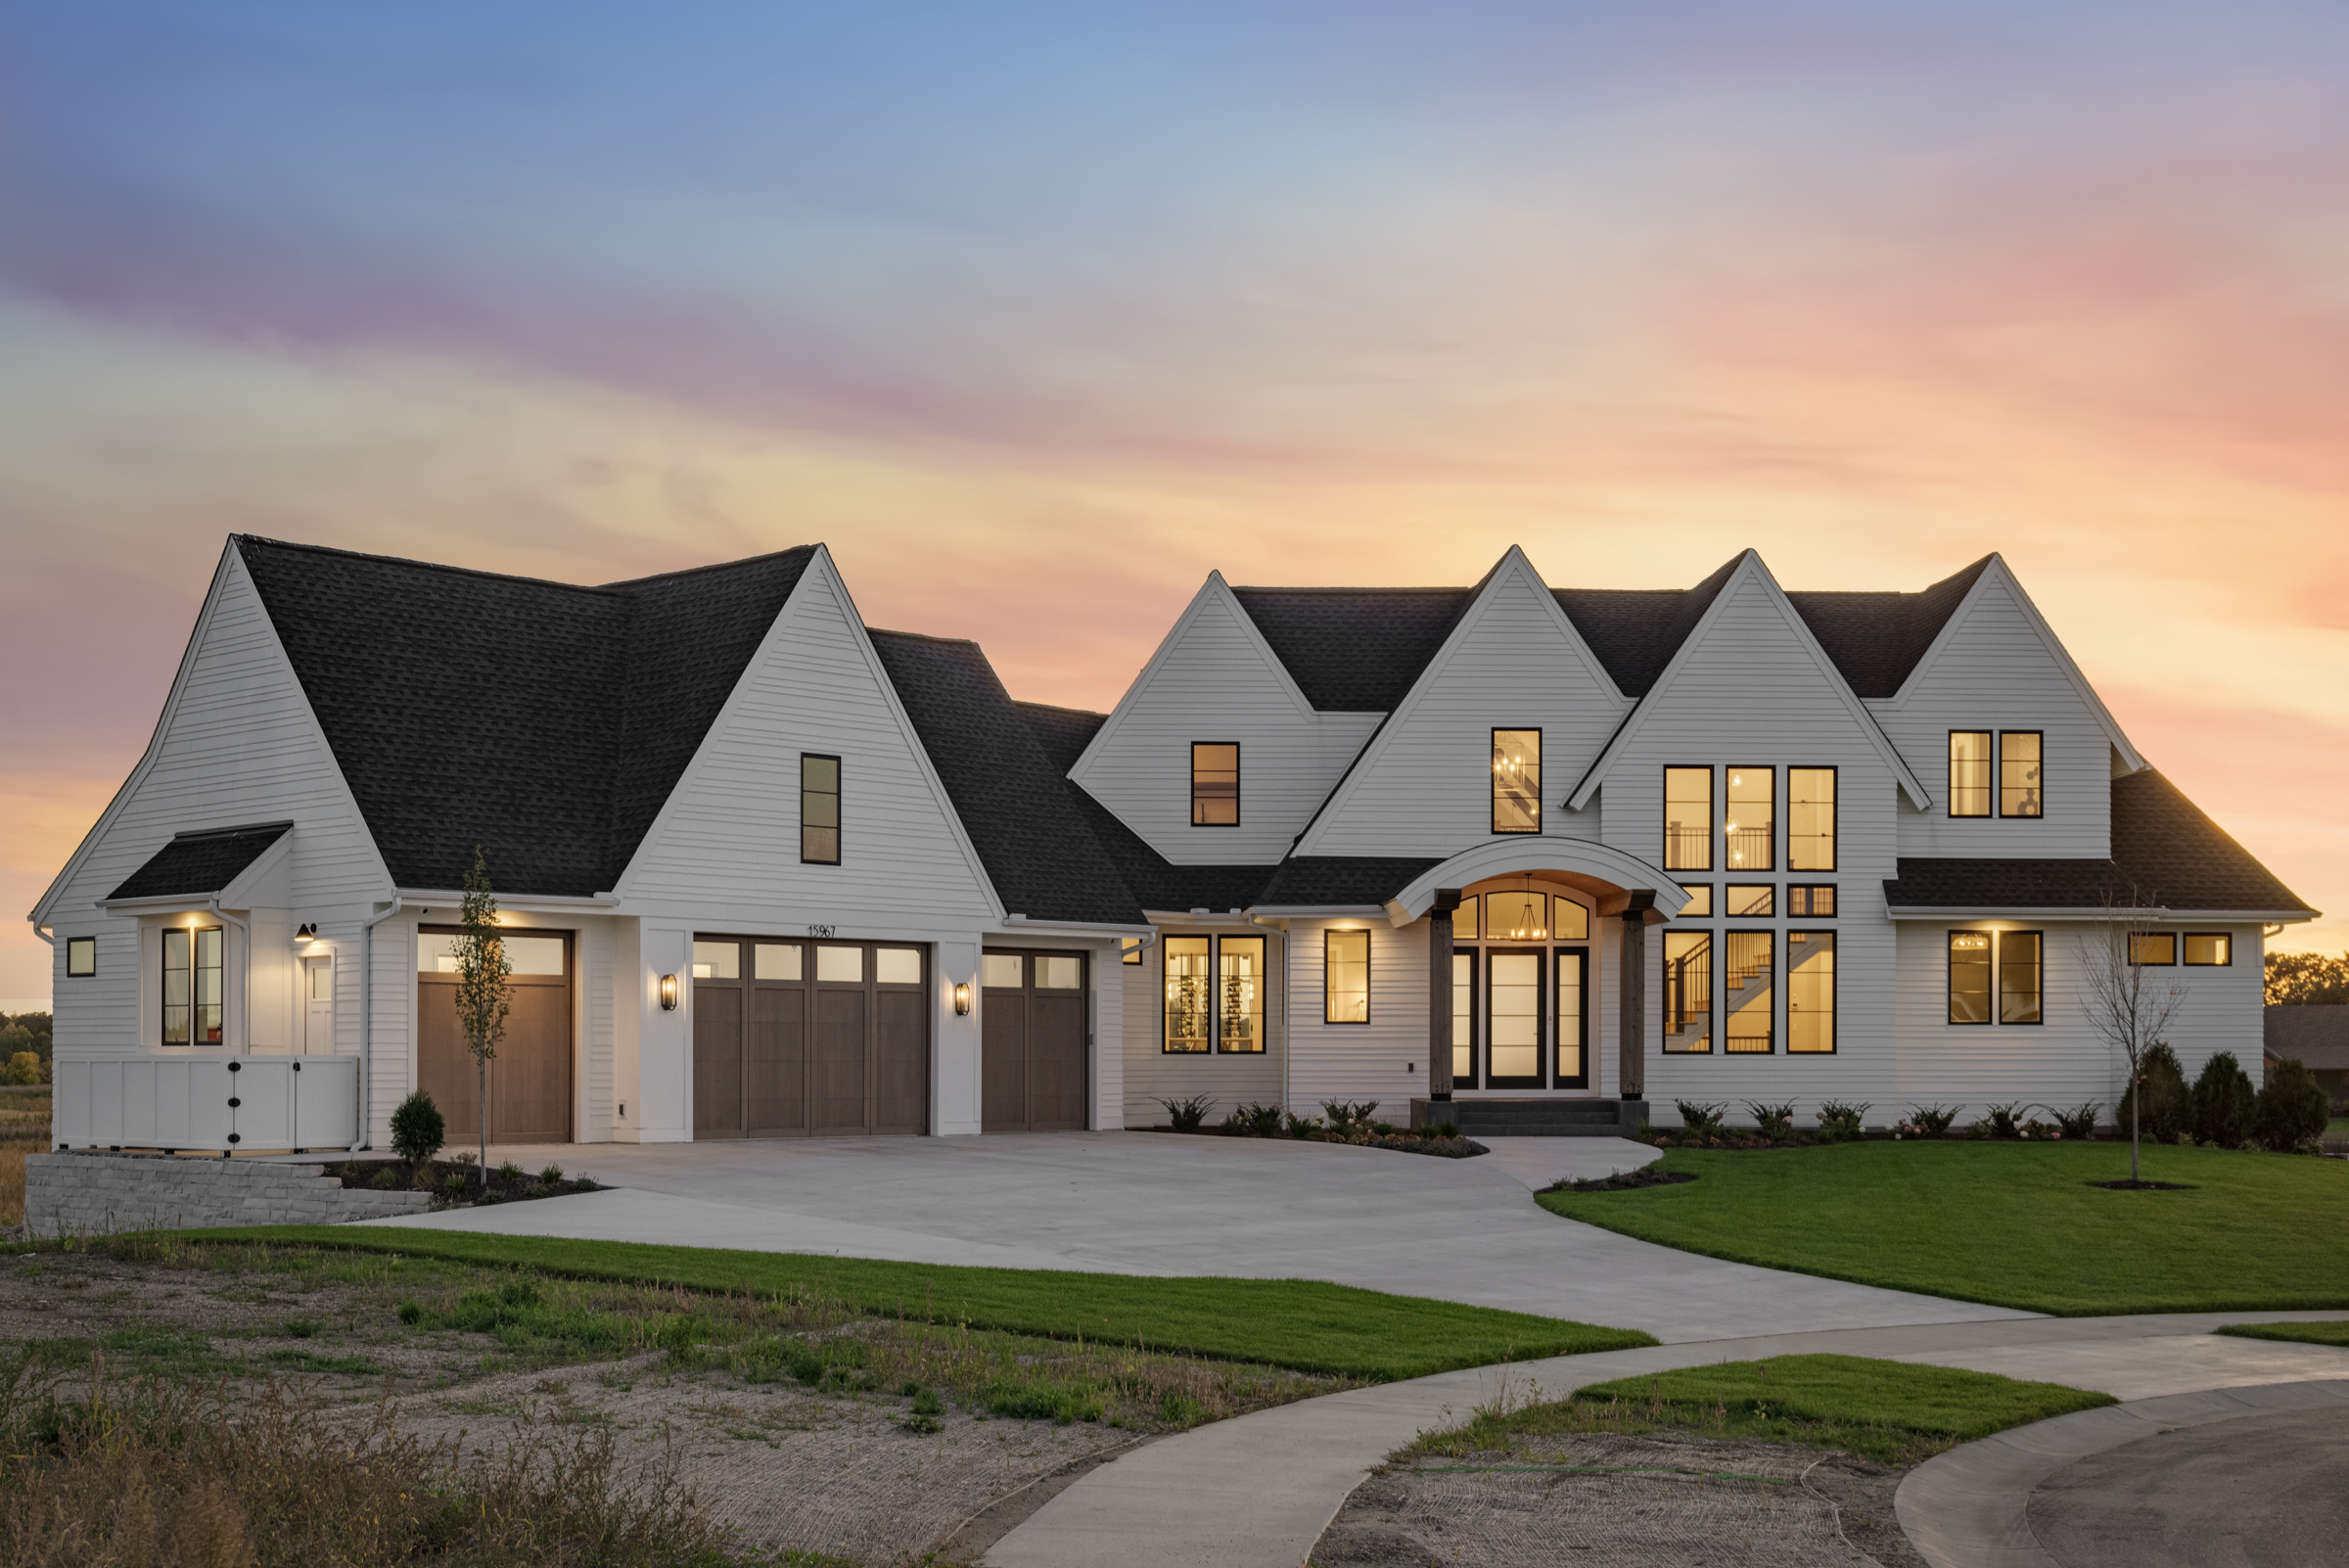 The exterior of a large white prairie home at dusk.